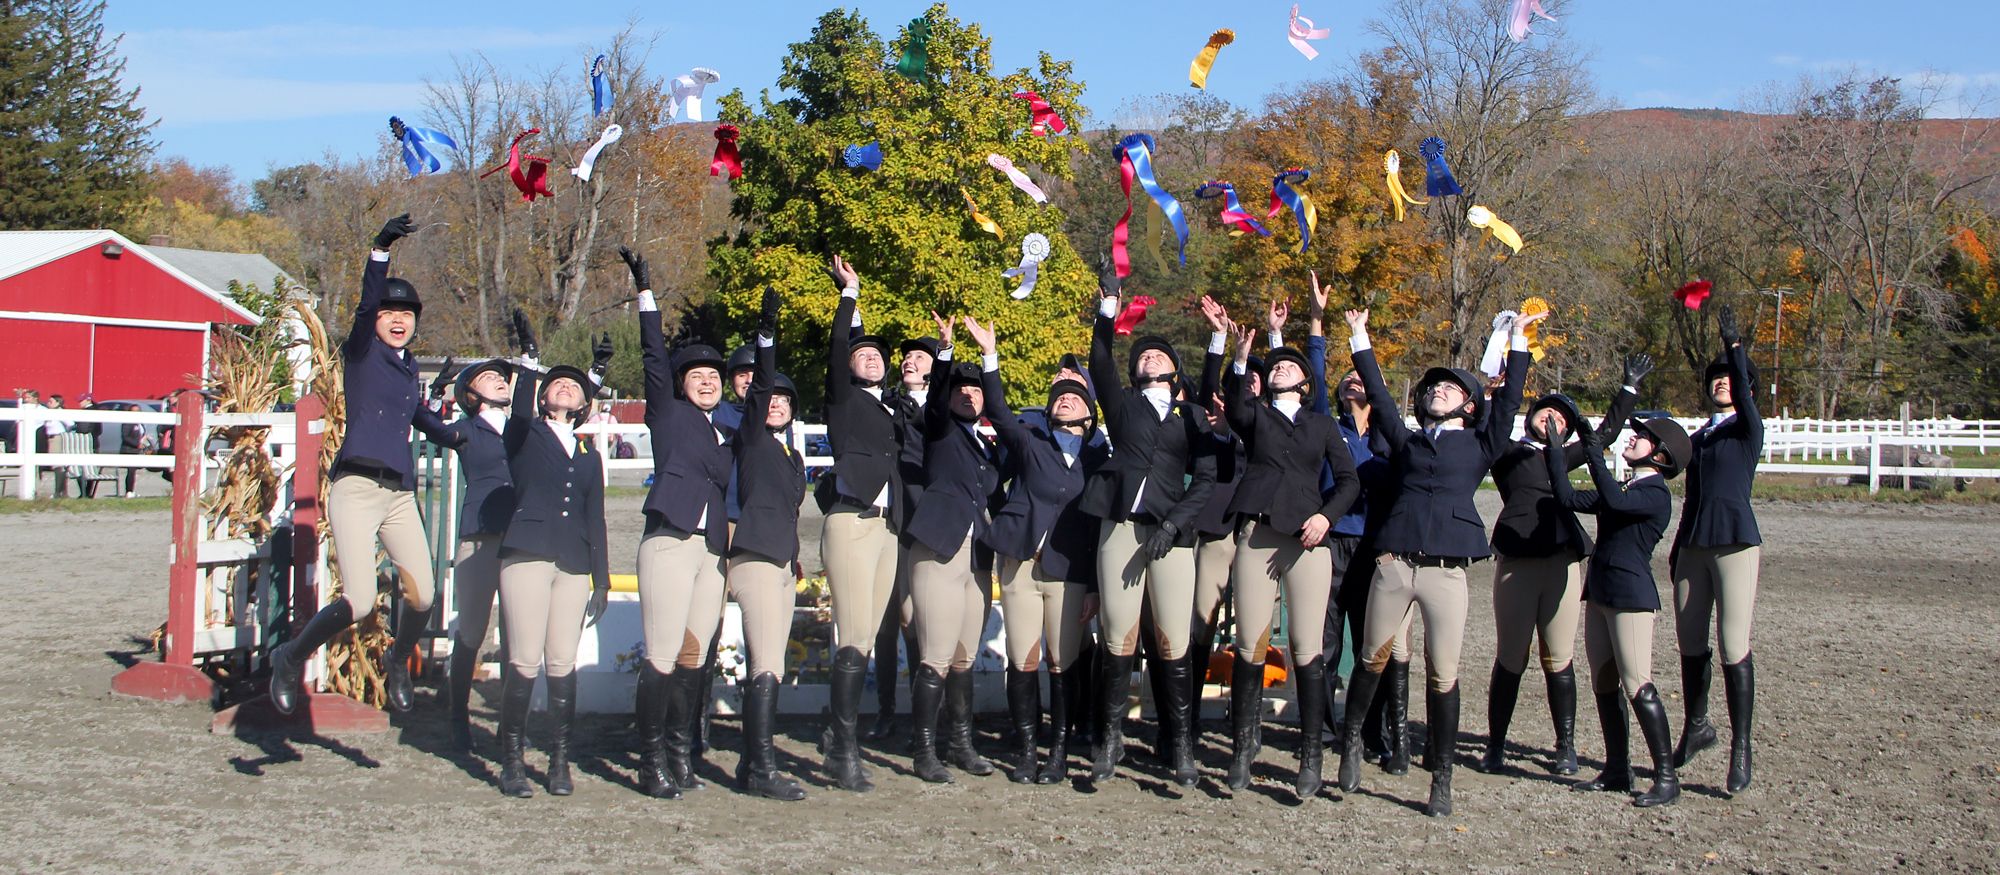 The Mount Holyoke riding team won the High Point College title at the Williams College Show on Oct. 15, 2022 in Williamstown, Mass. At right: Emmie Mirarchi '24